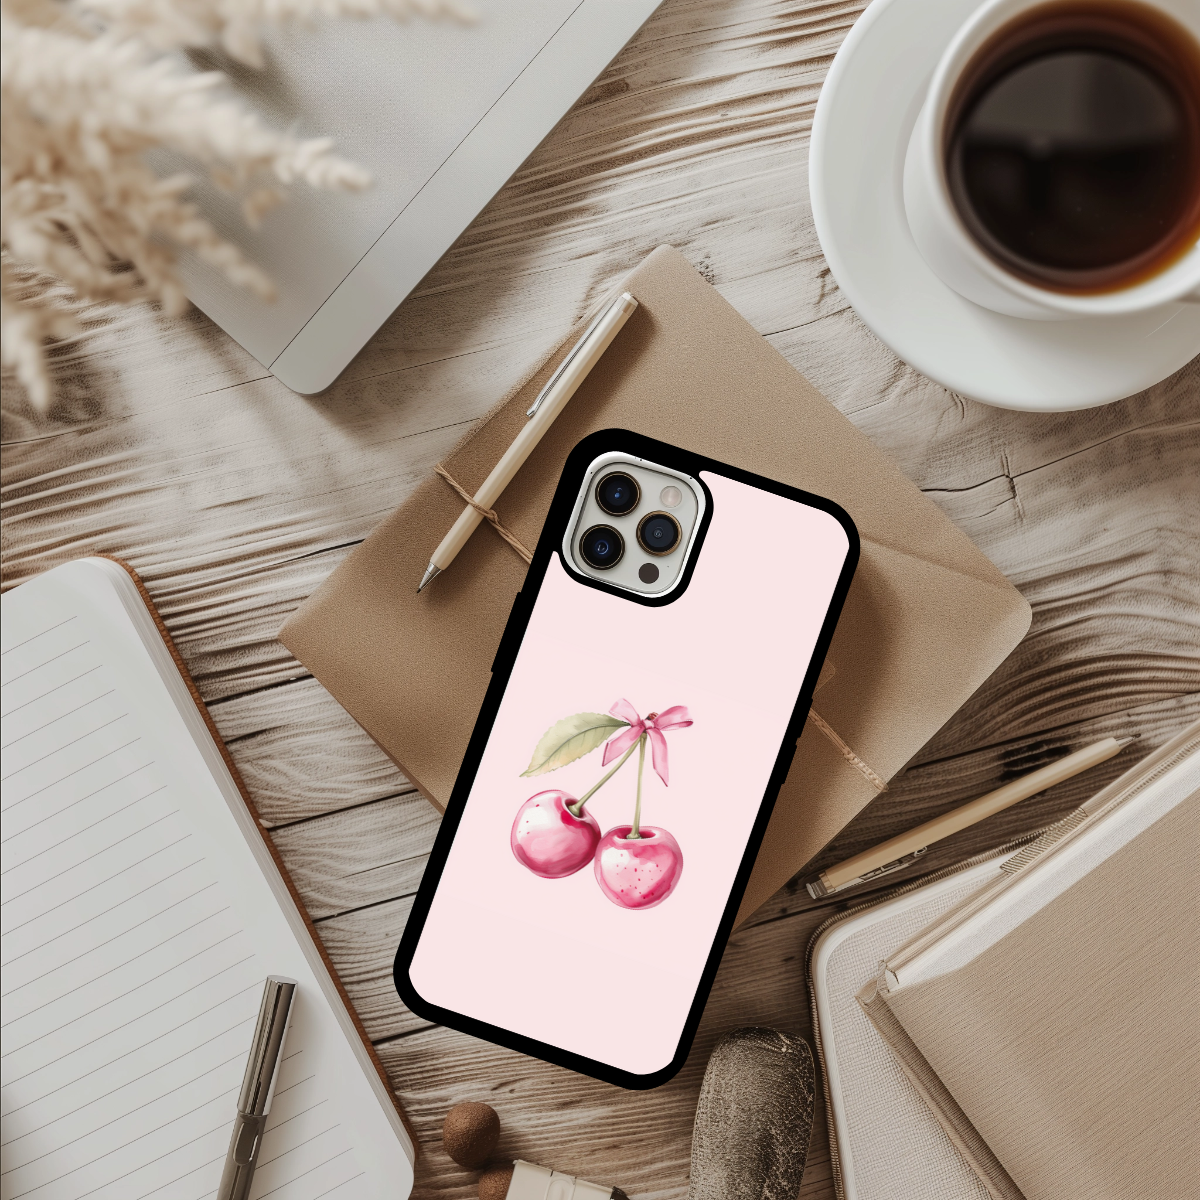 Coquette Phone Case - Cherry phone case the perfect gift for her - cute phone case - best birthday gift - iphone case - girly phone case - pretty phone case - pink phone case